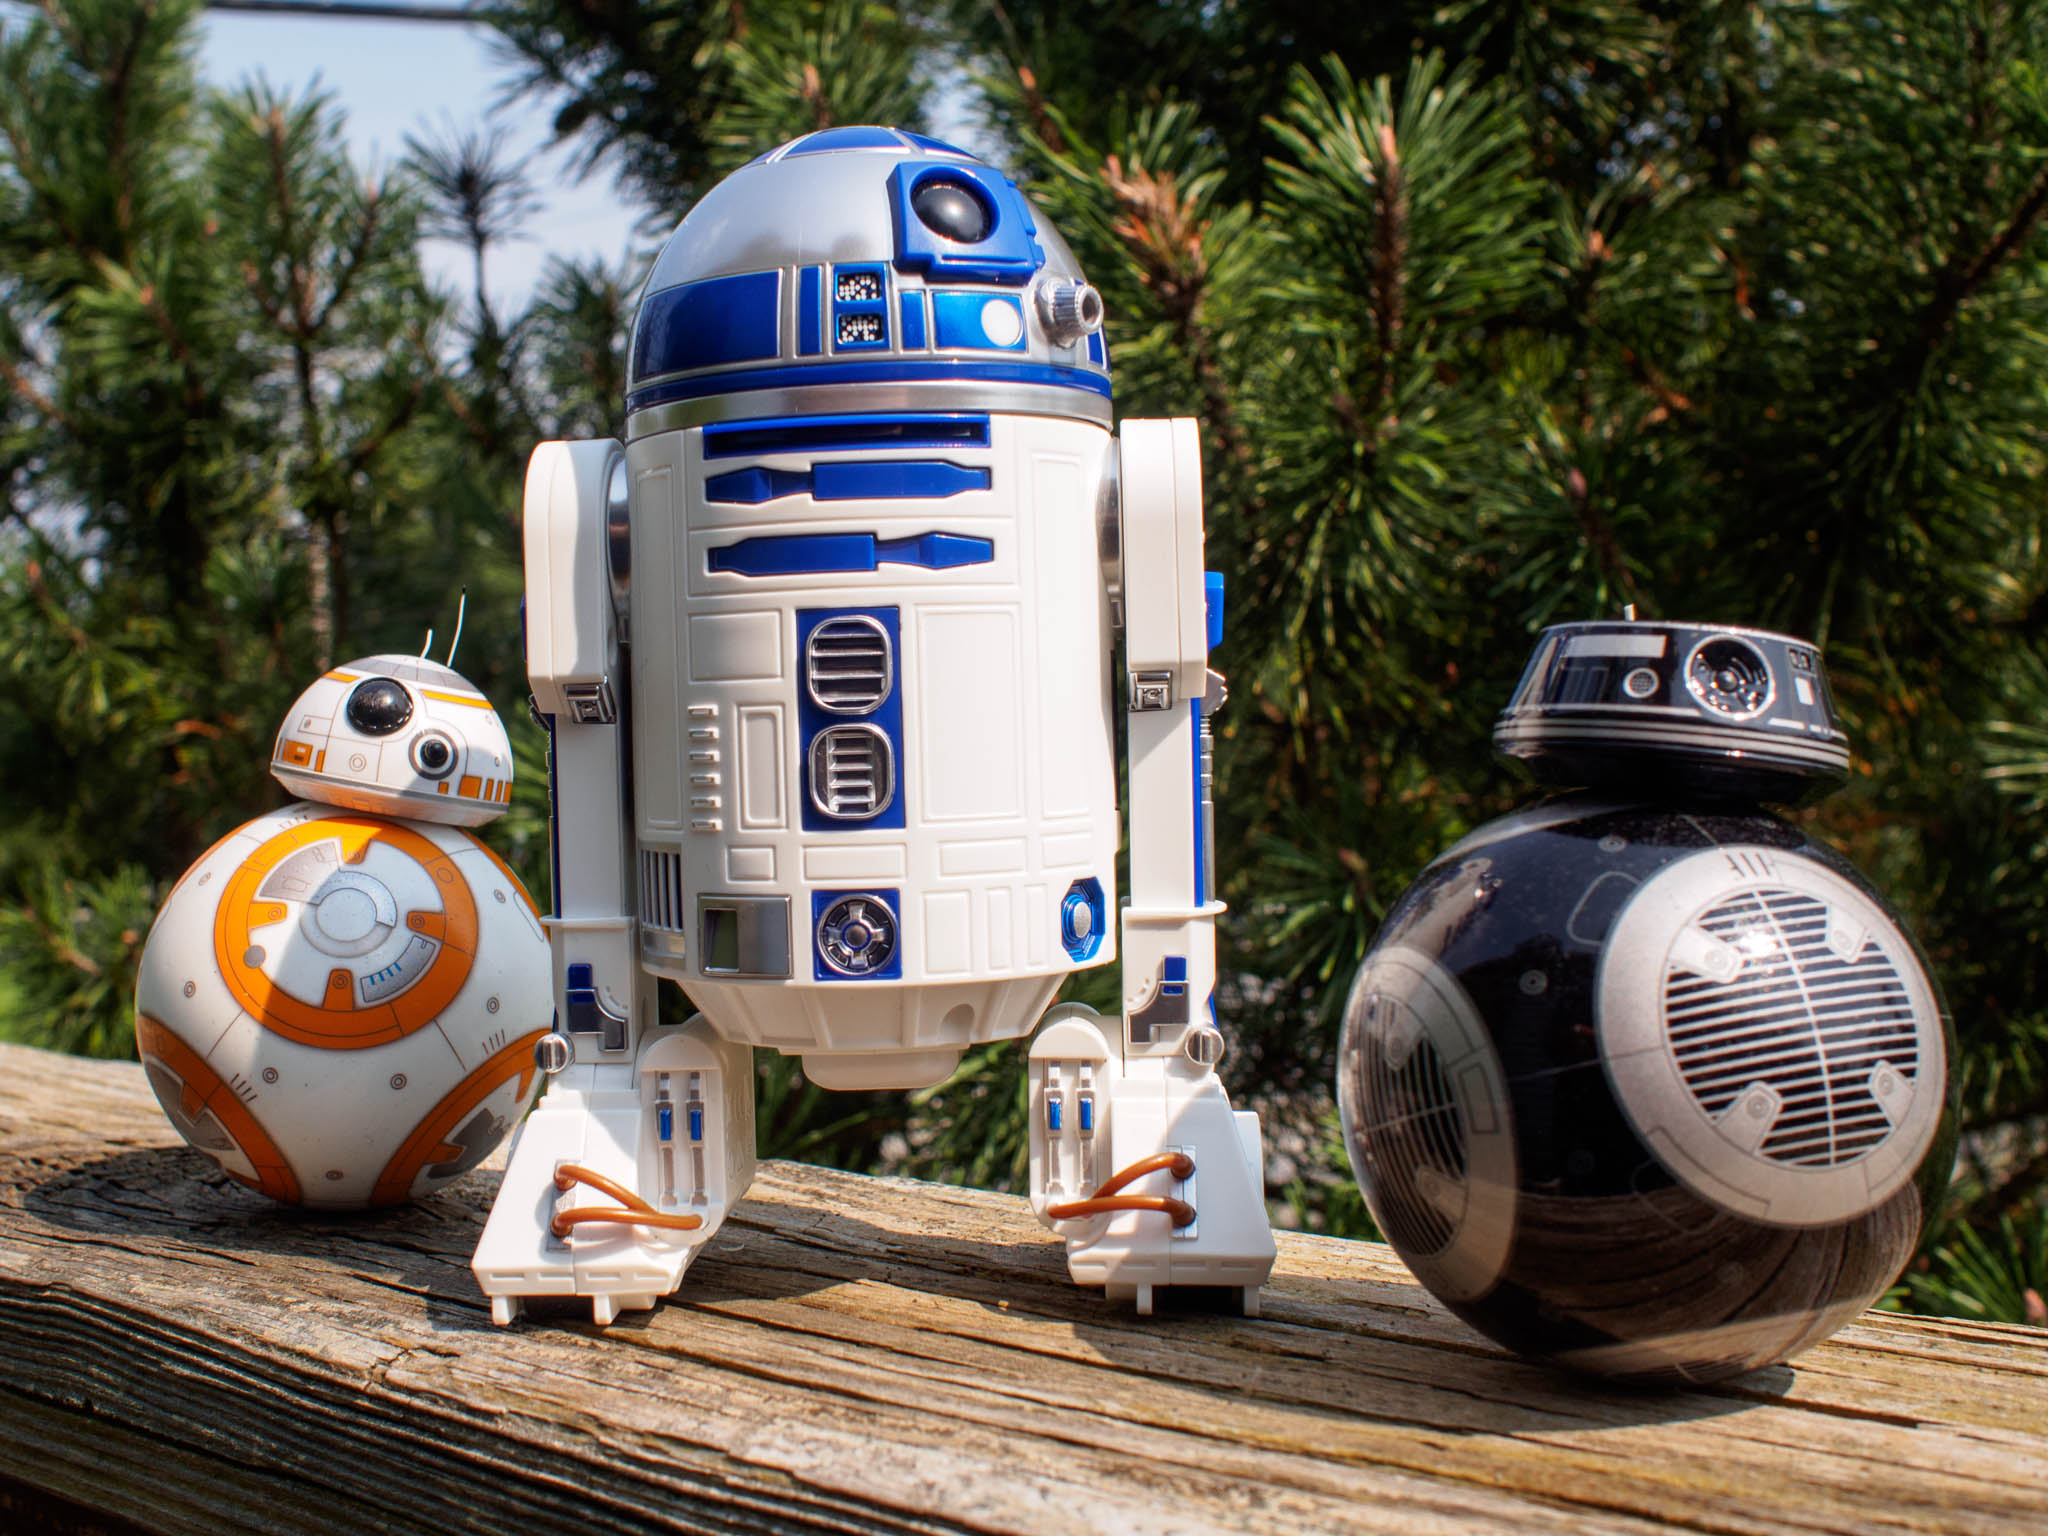 Boulder startup Sphero and its BB-9e droid toy have a lot riding